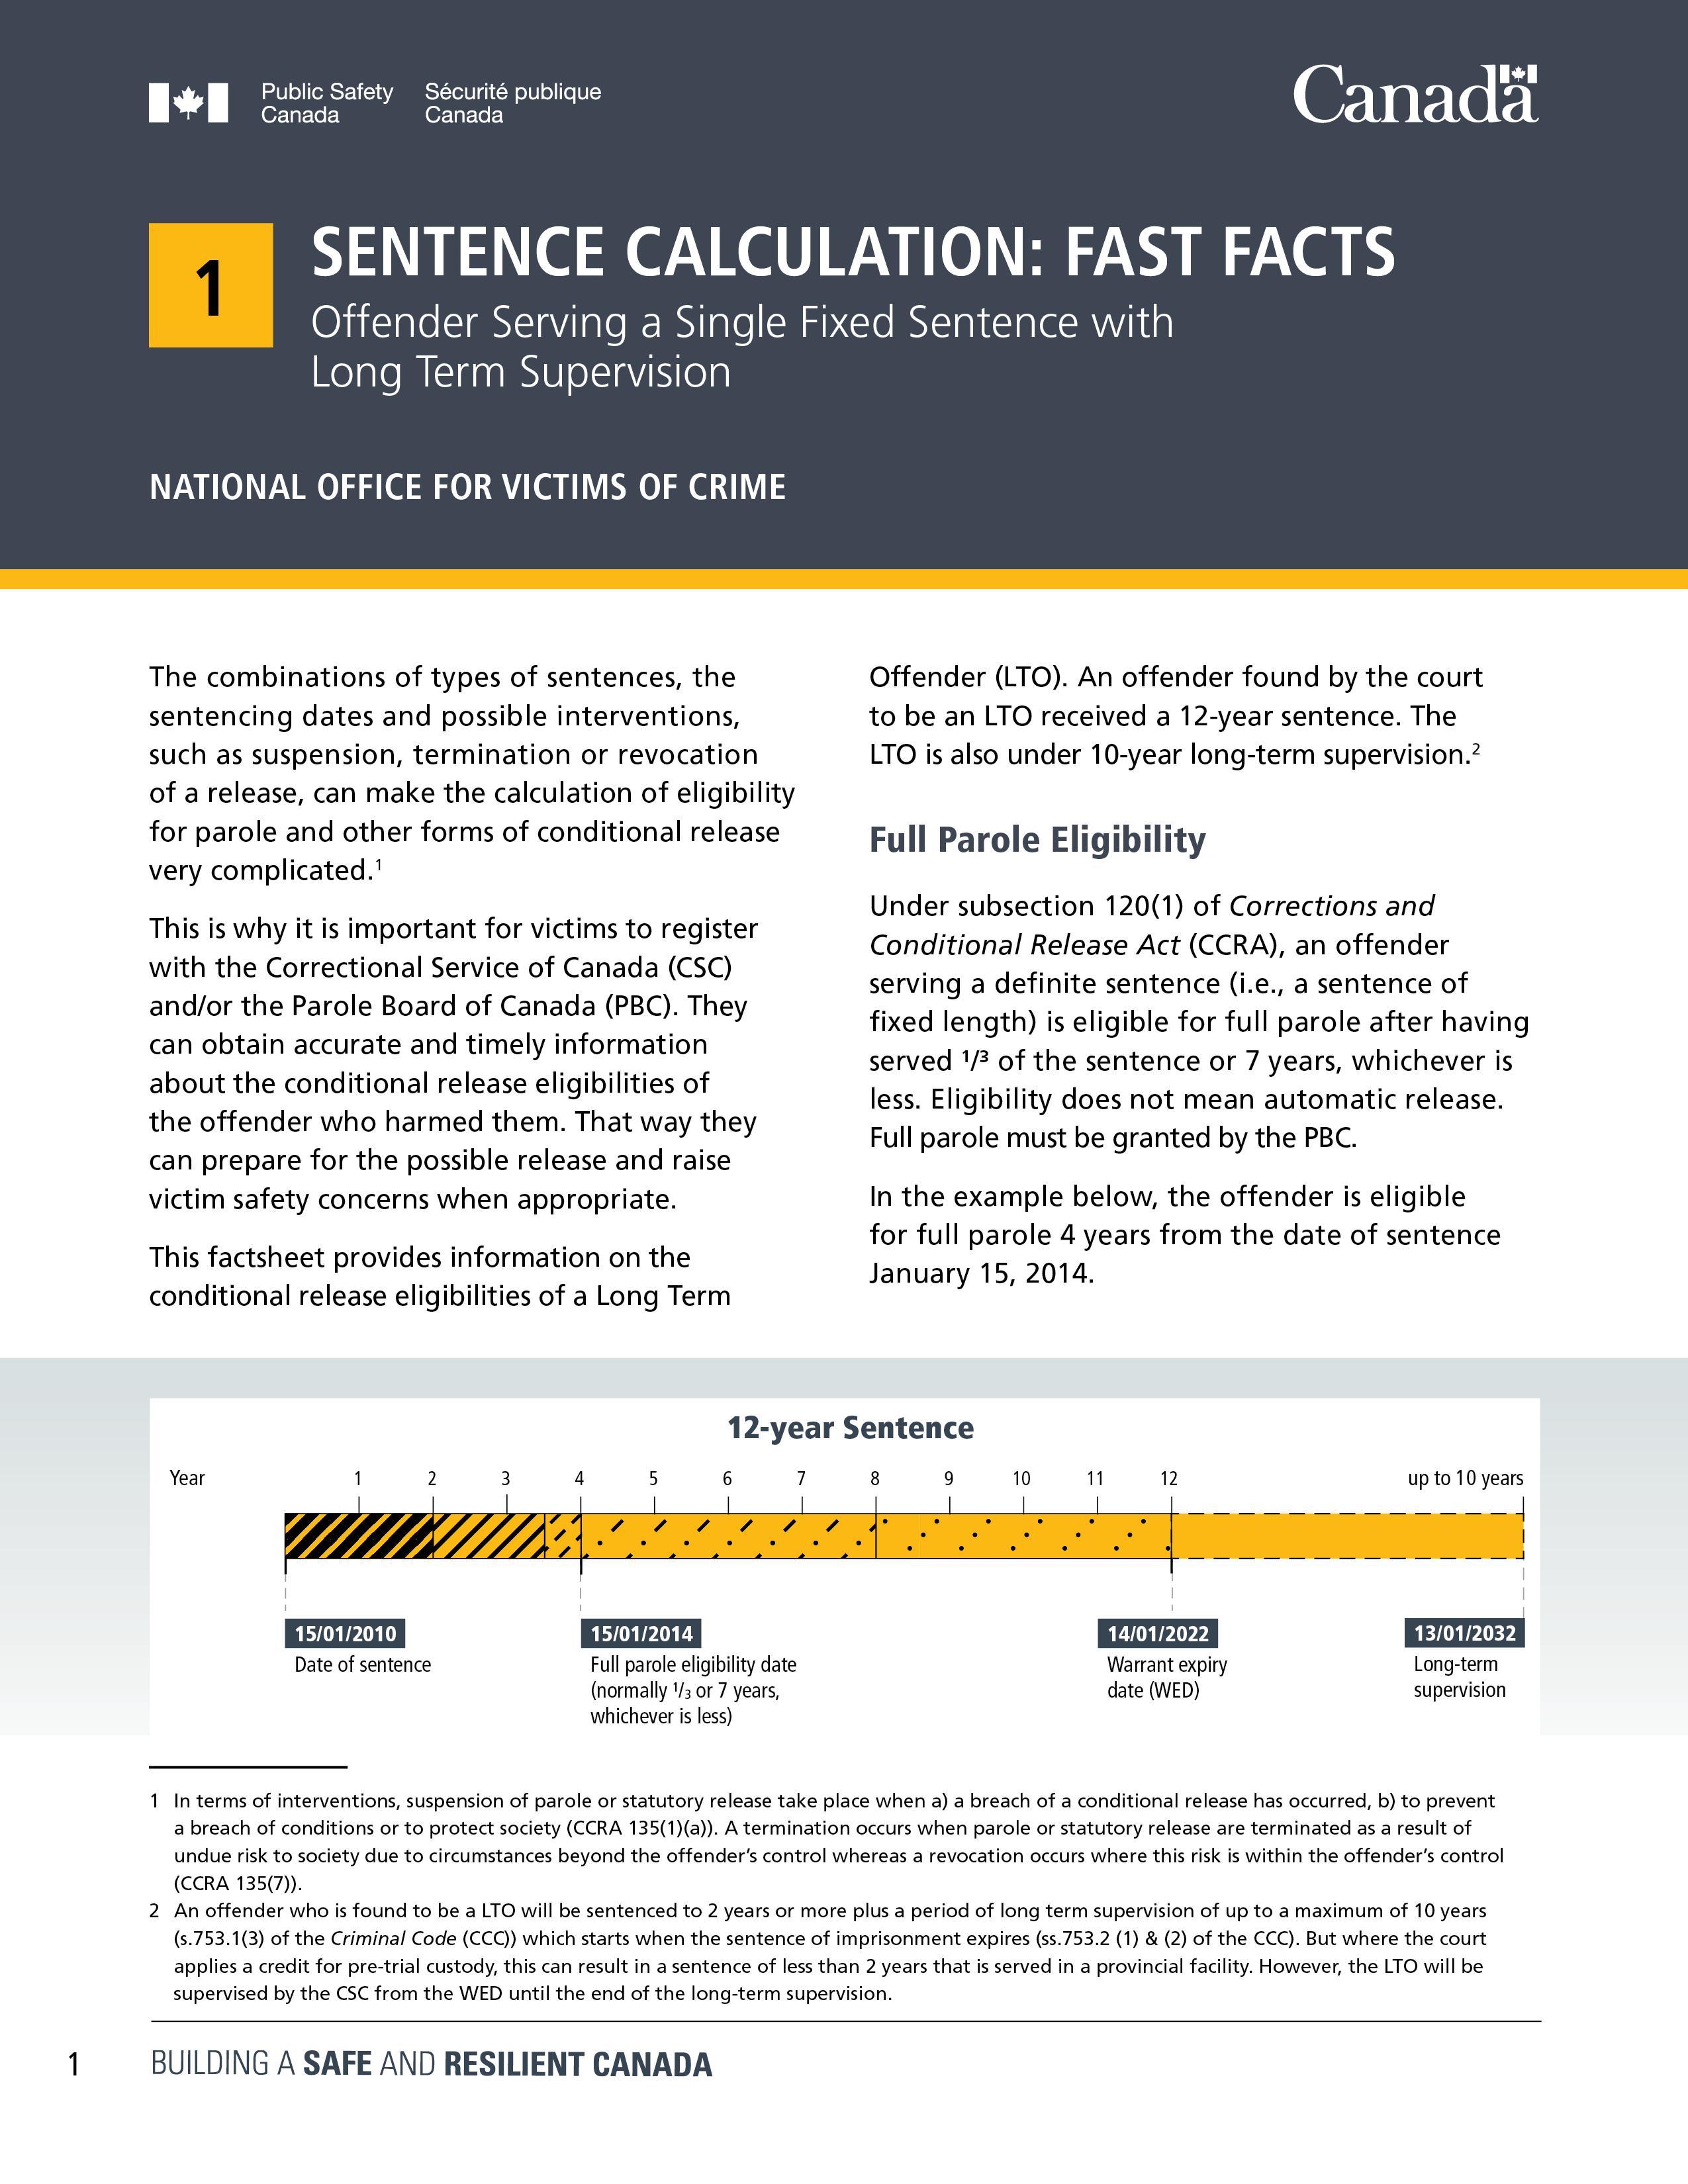 Sentence Calculation: Fast Facts: Offender Serving a Single Fixed Sentence with Long Term Supervision